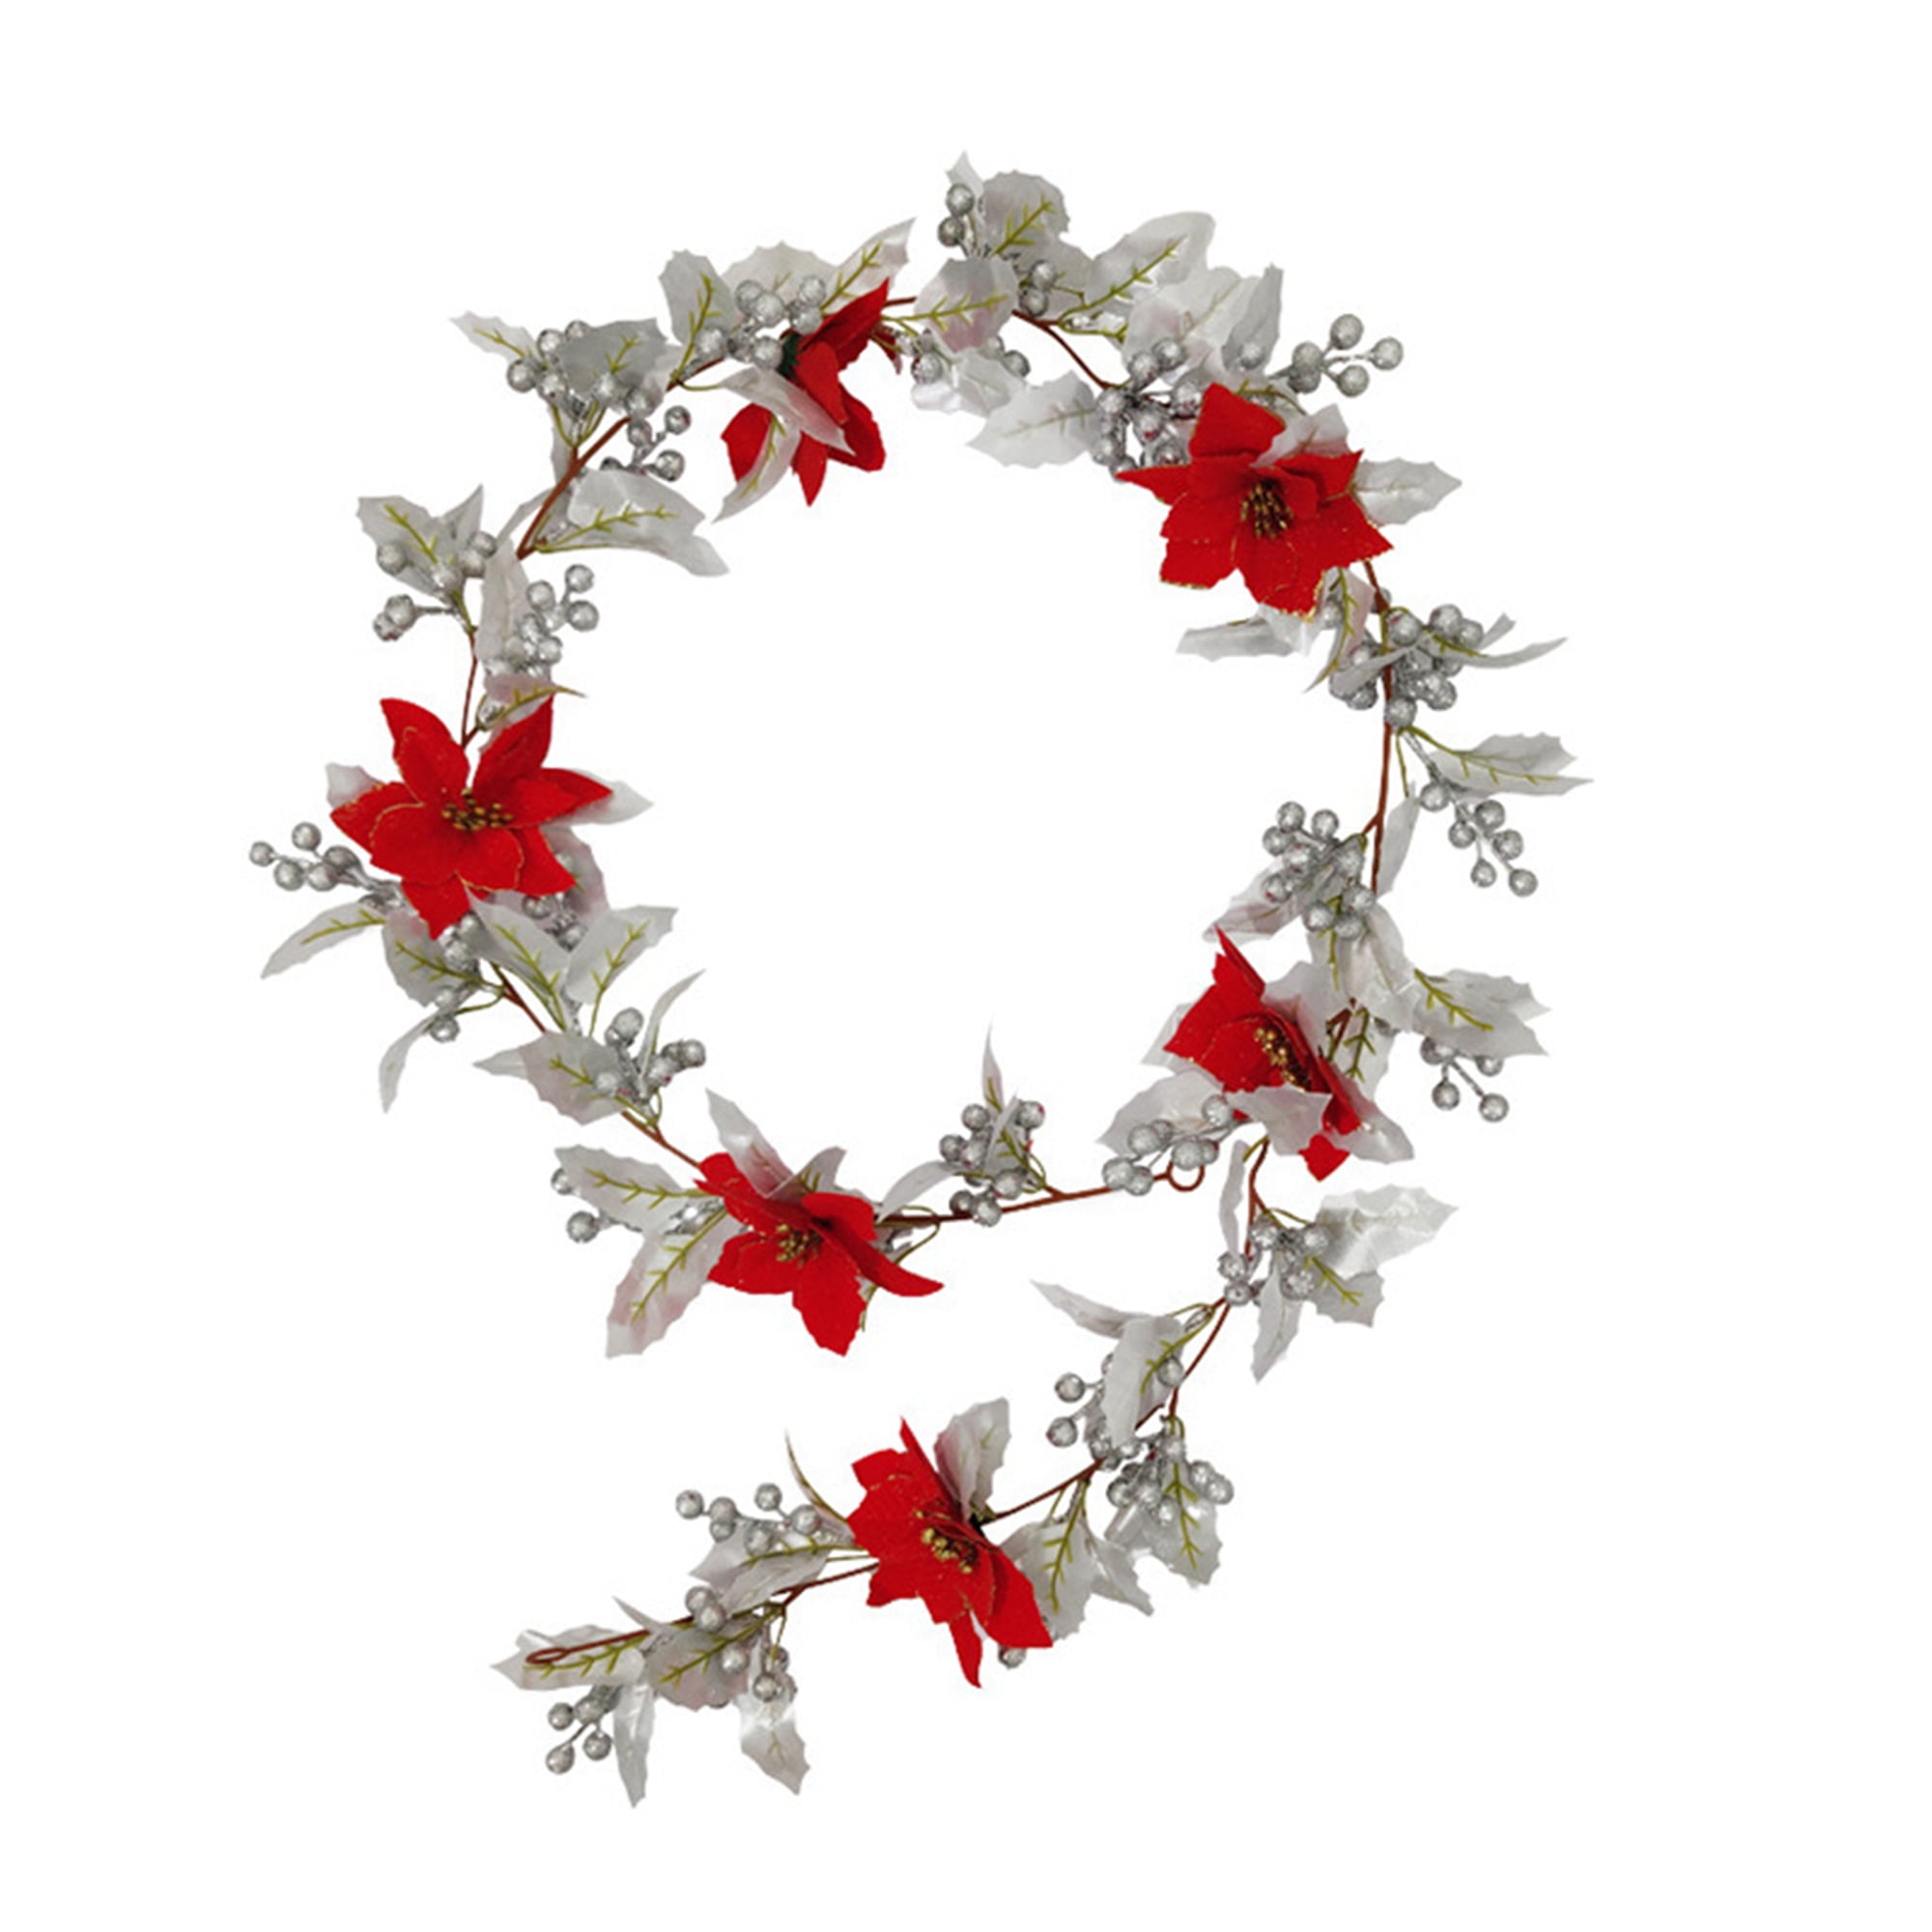 TFFR Christmas Garland 5.7ft Artificial Berry Garland with Holly Leaf